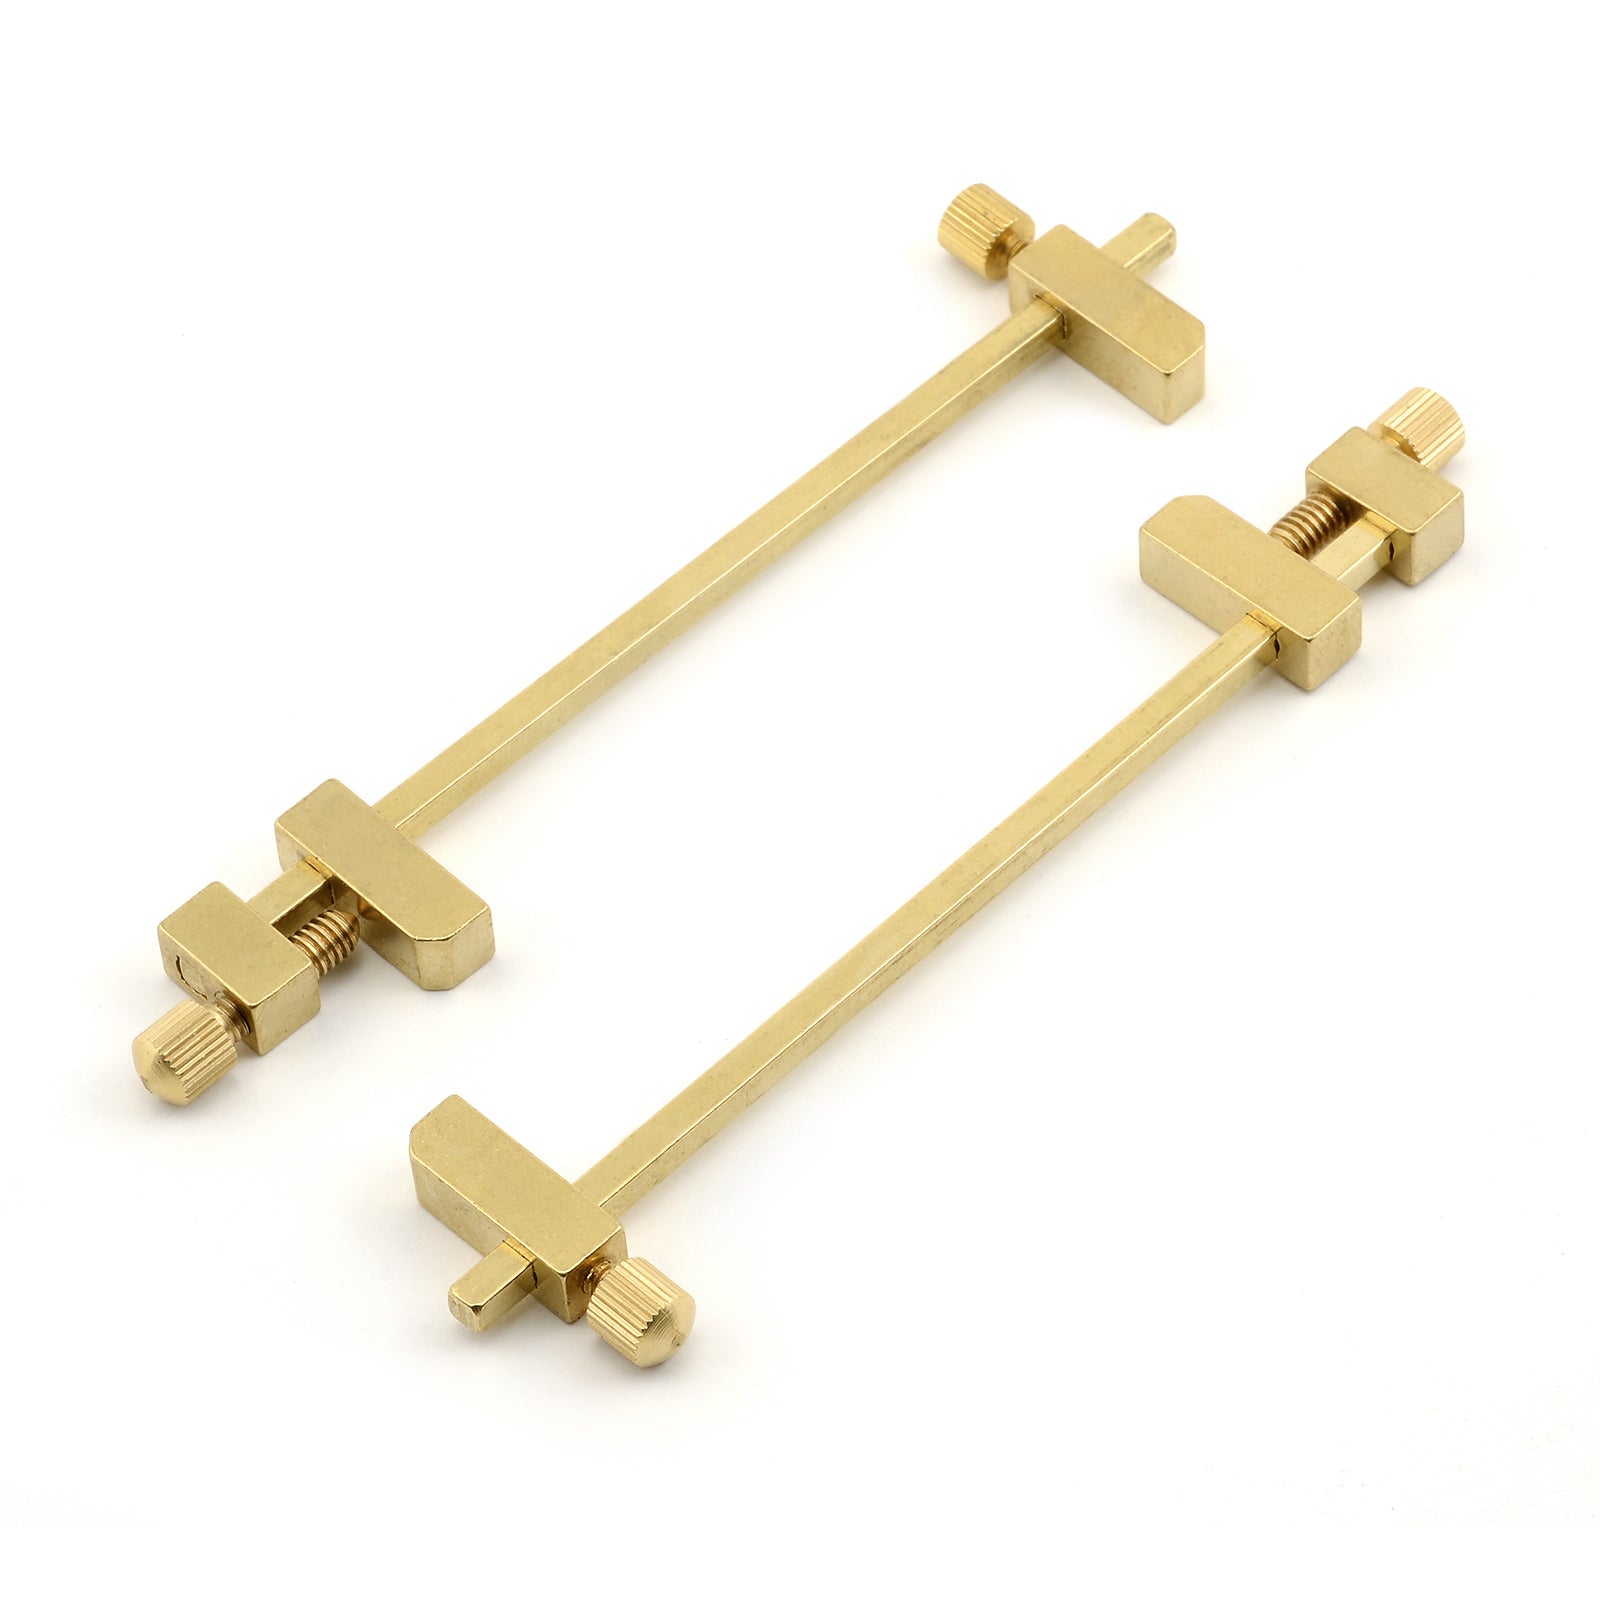 Solid Brass Miniature Bar Clamps, 3 - 3/4 Inches Long (Set of 2) - Micro - Mark Tool Clamps & Vises